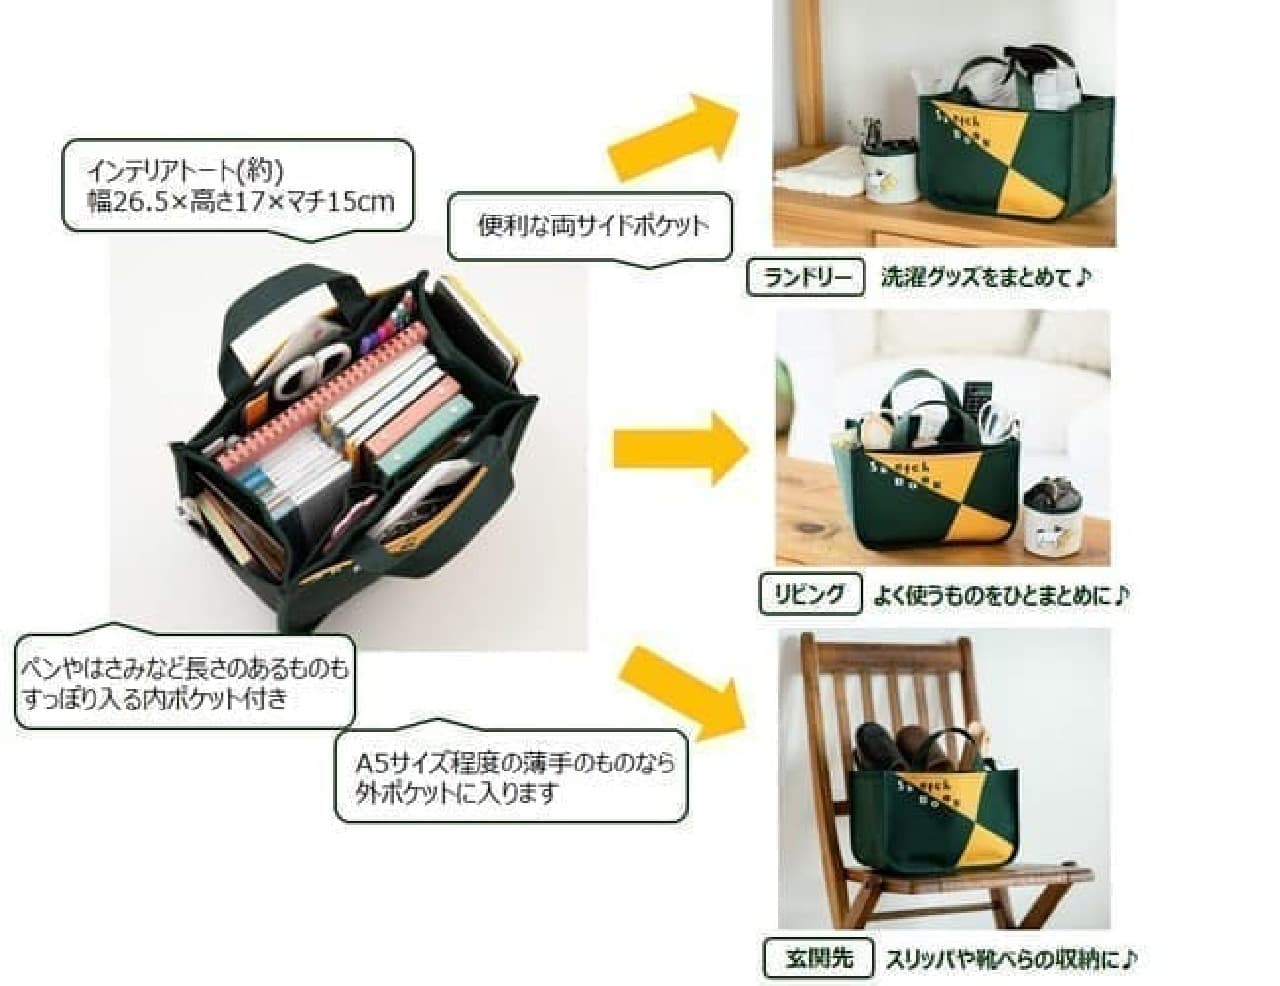 Maruman's "Design Sketchbook" pattern tote bag is now available--The second in the "ZUAN LOVE!" Series